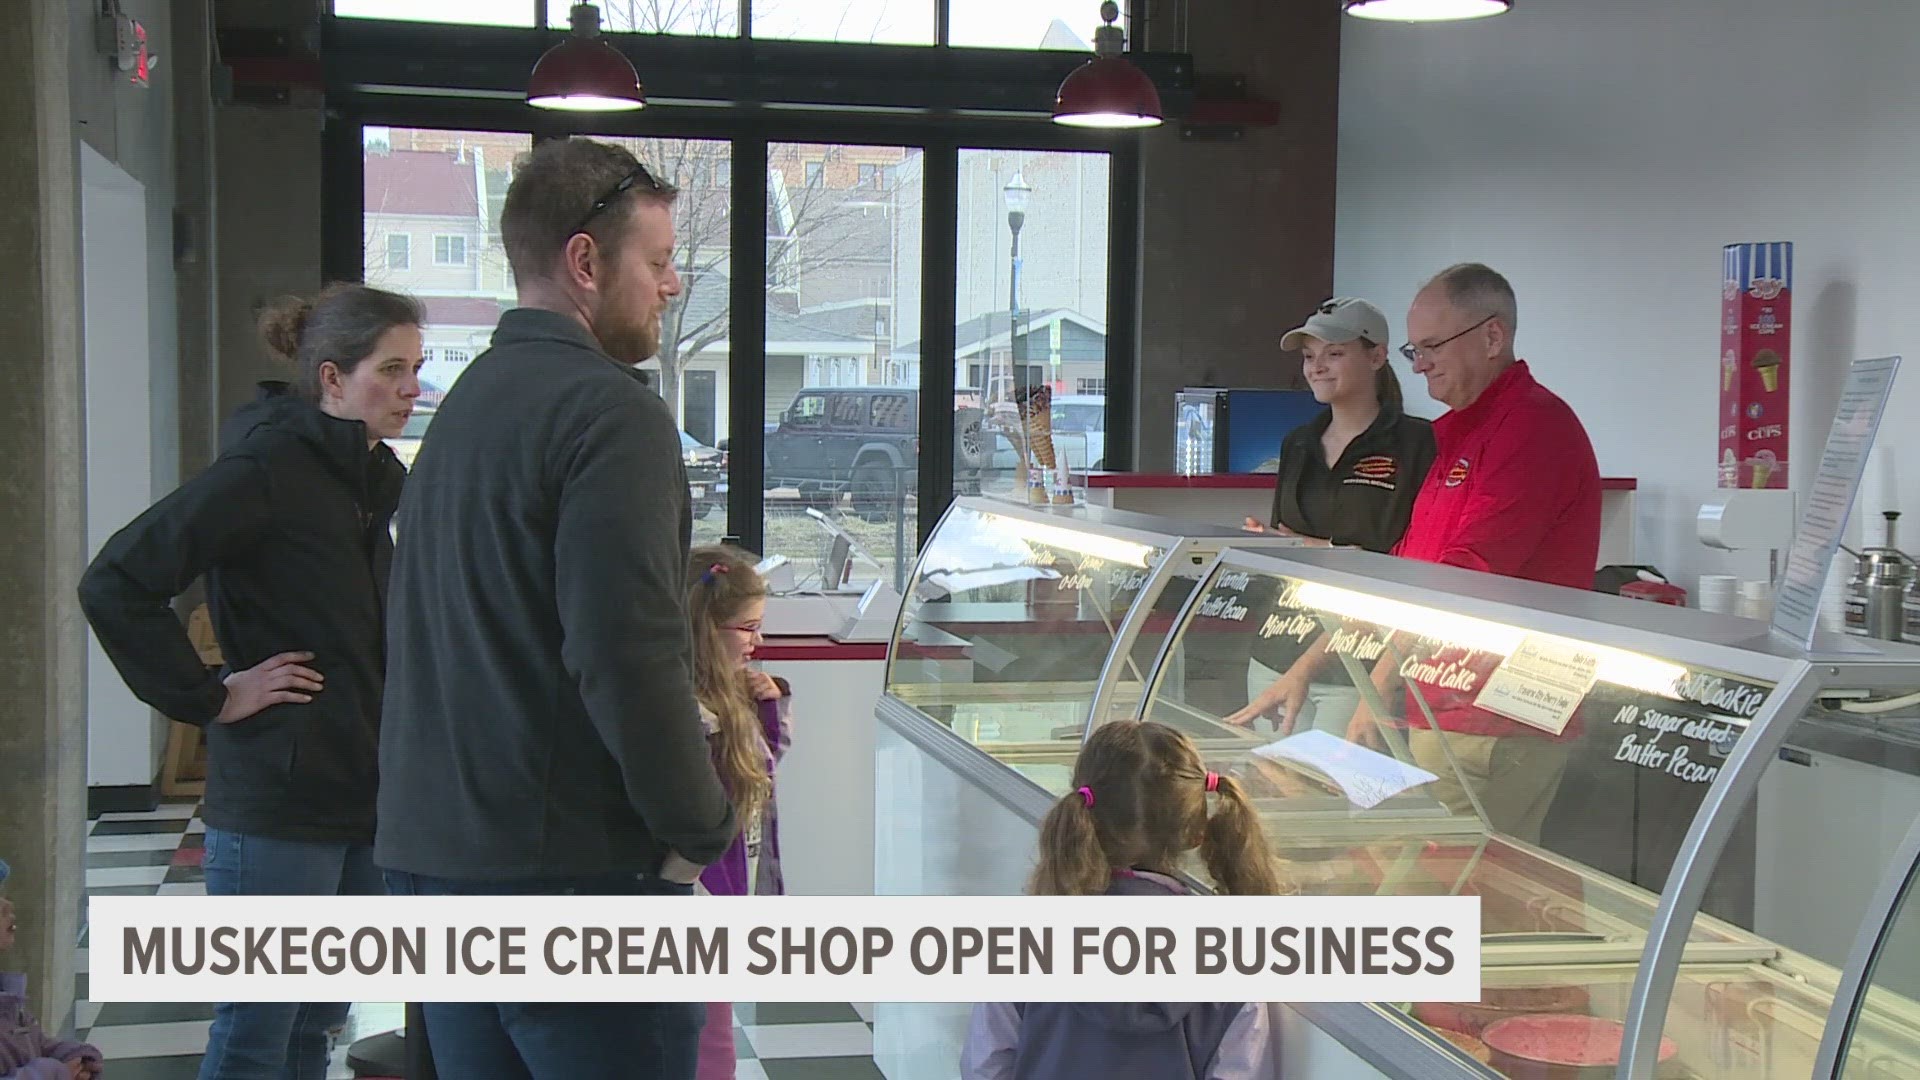 Spring might still be a couple months away but that didn't stop Hometown Creamery from springing to action and opening their doors when the sun came out.